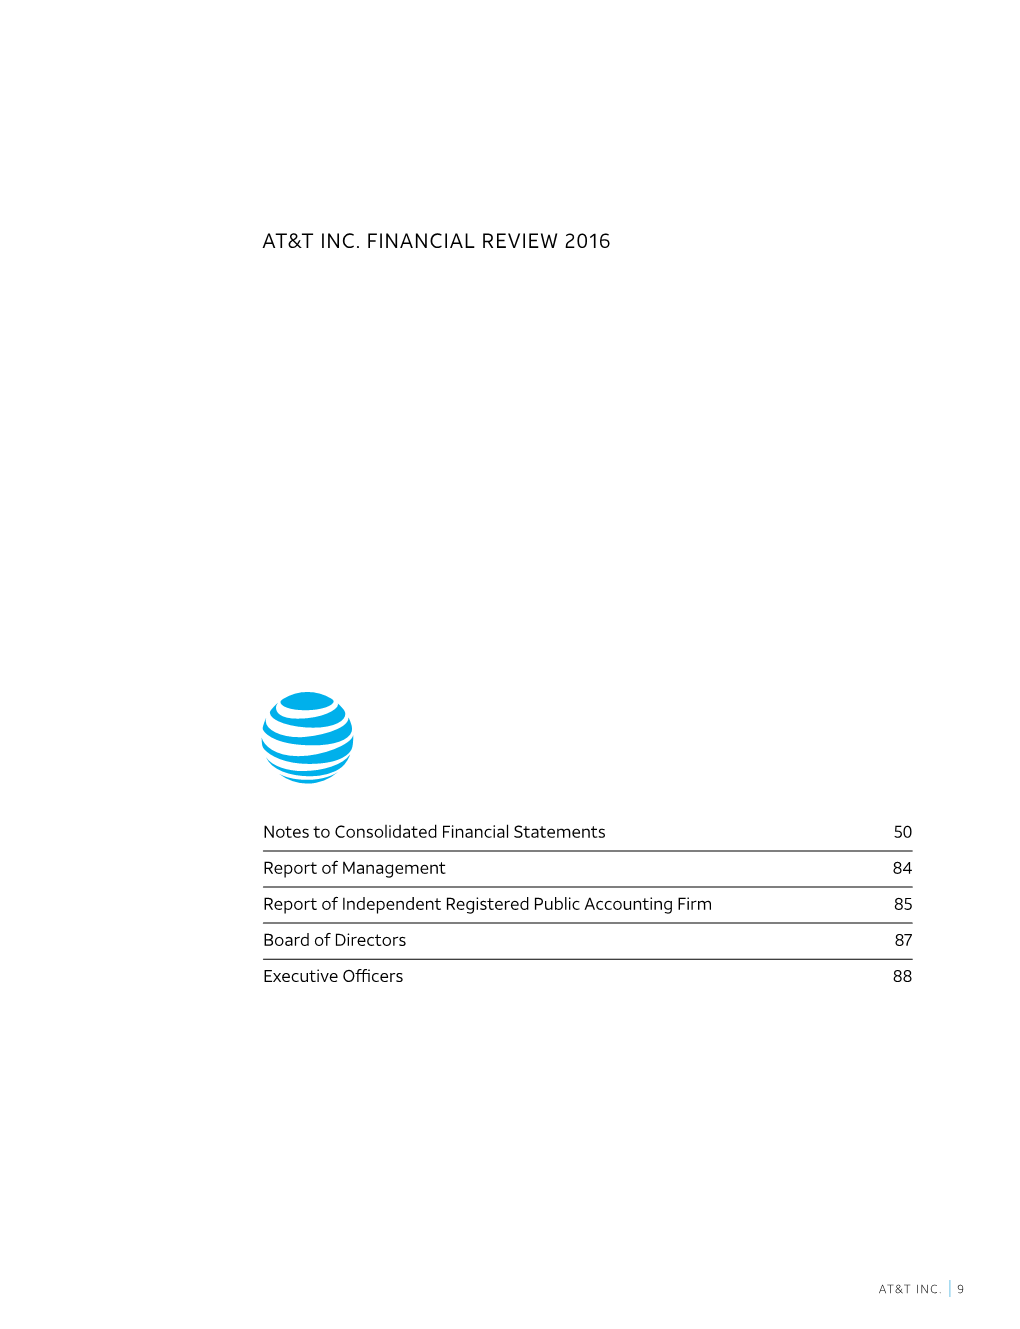 At&T Inc. Financial Review 2016